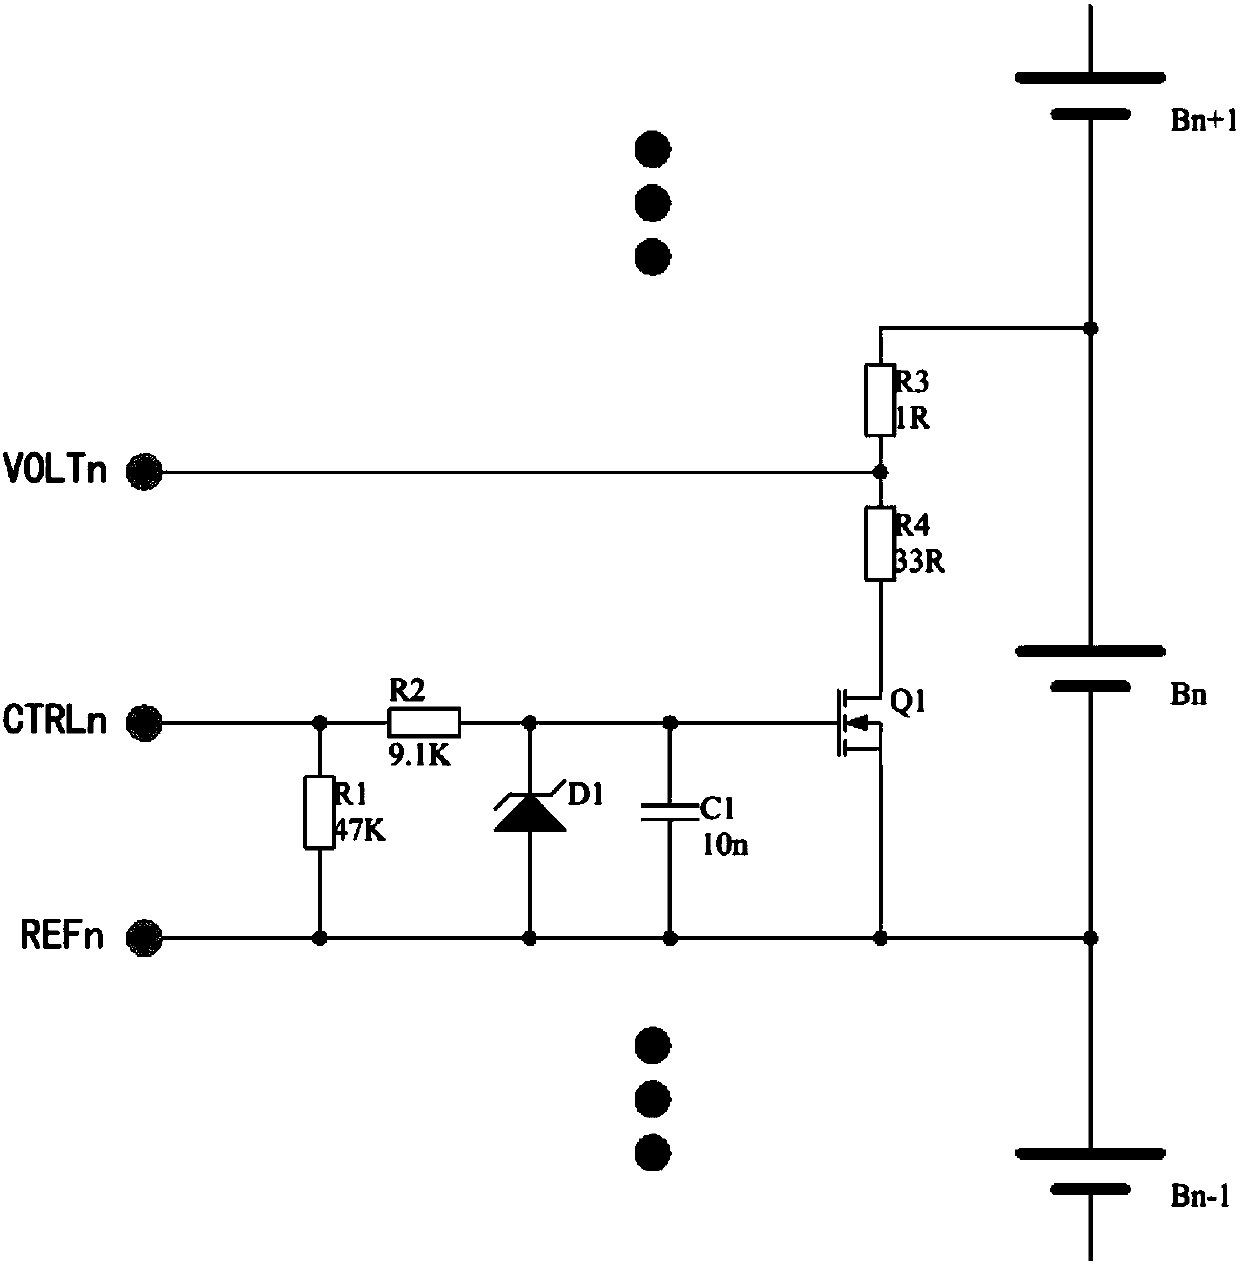 A passive equalization circuit for a battery management system